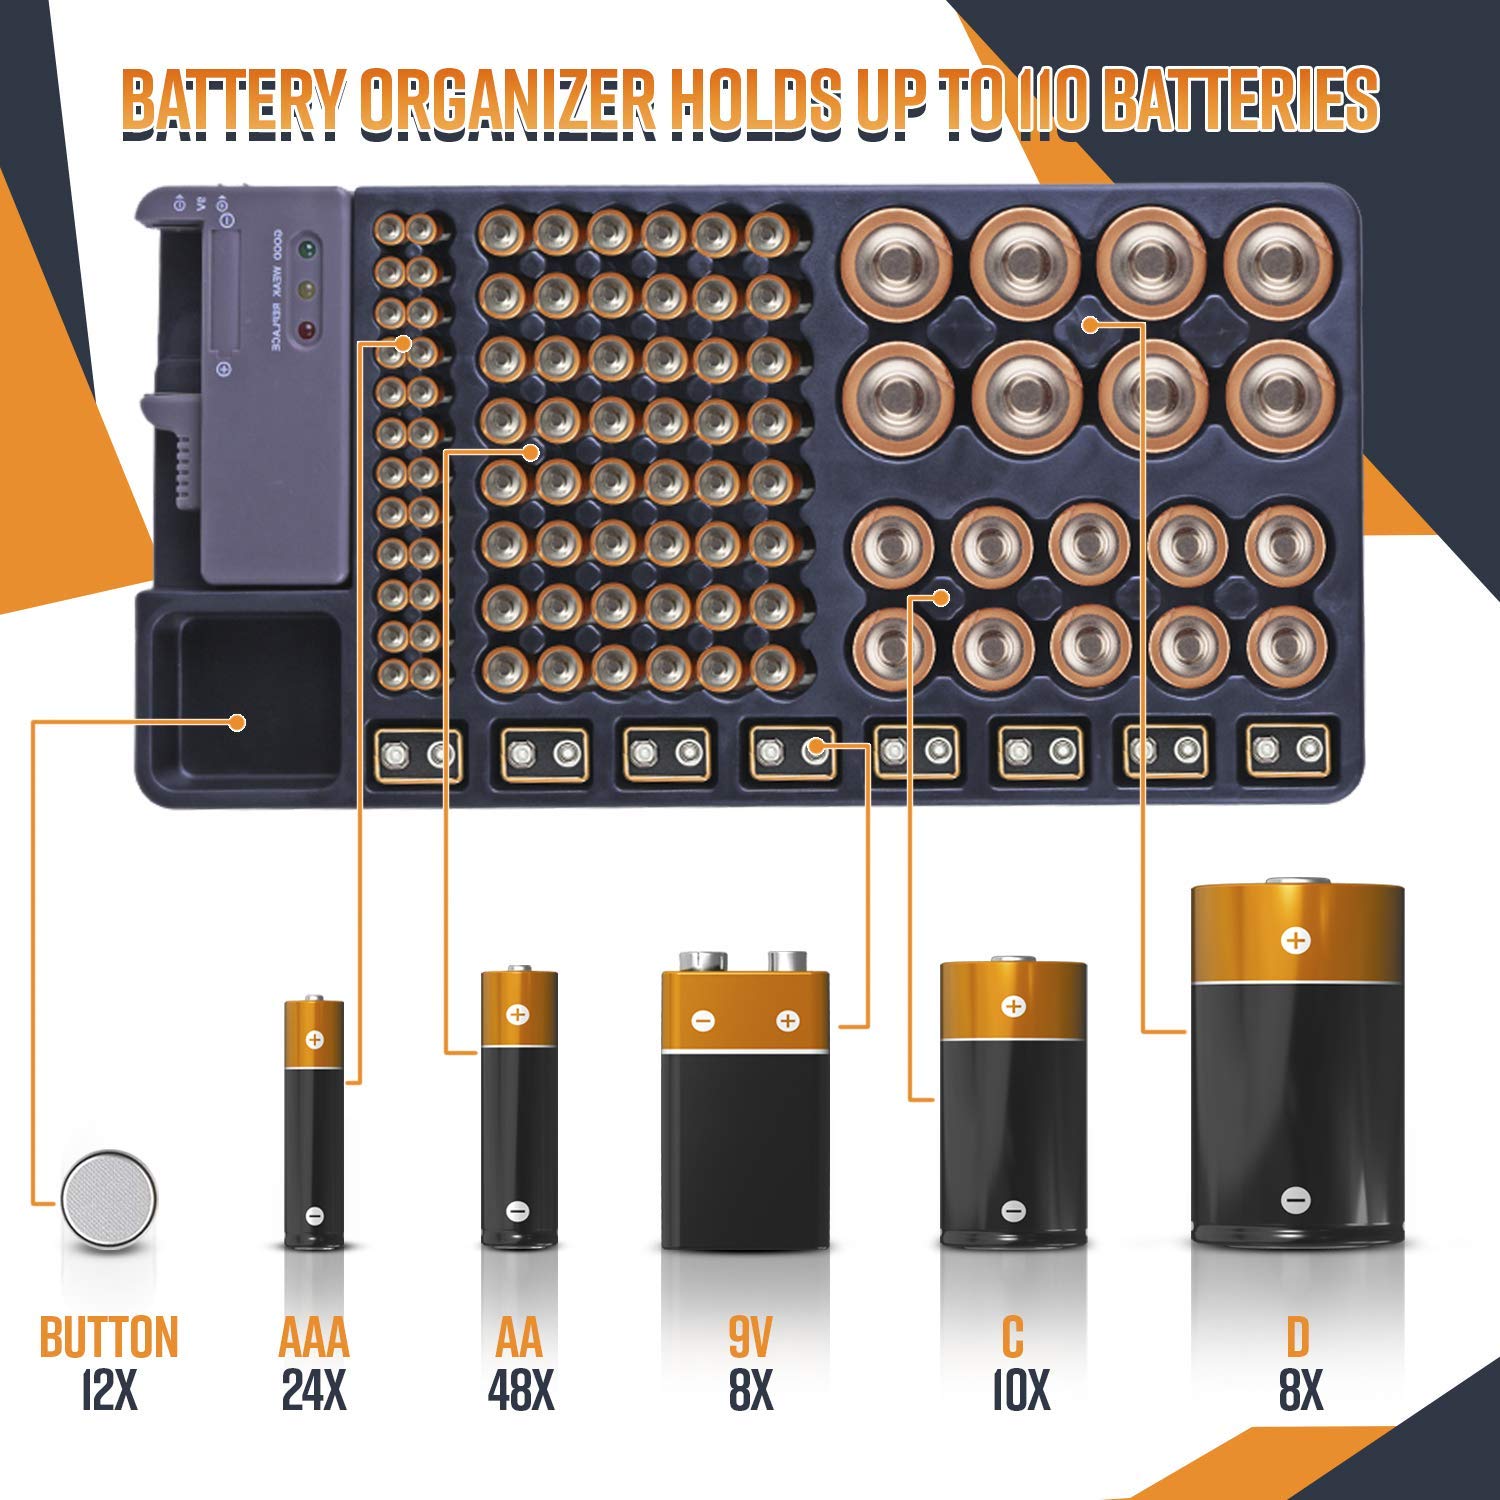 FFYY-Battery Storage Organizer Holder with Tester - Battery Caddy Rack Case  Box Holders Including Battery Checker For AAA AA C - Price history & Review, AliExpress Seller - Zoe's Digital Store